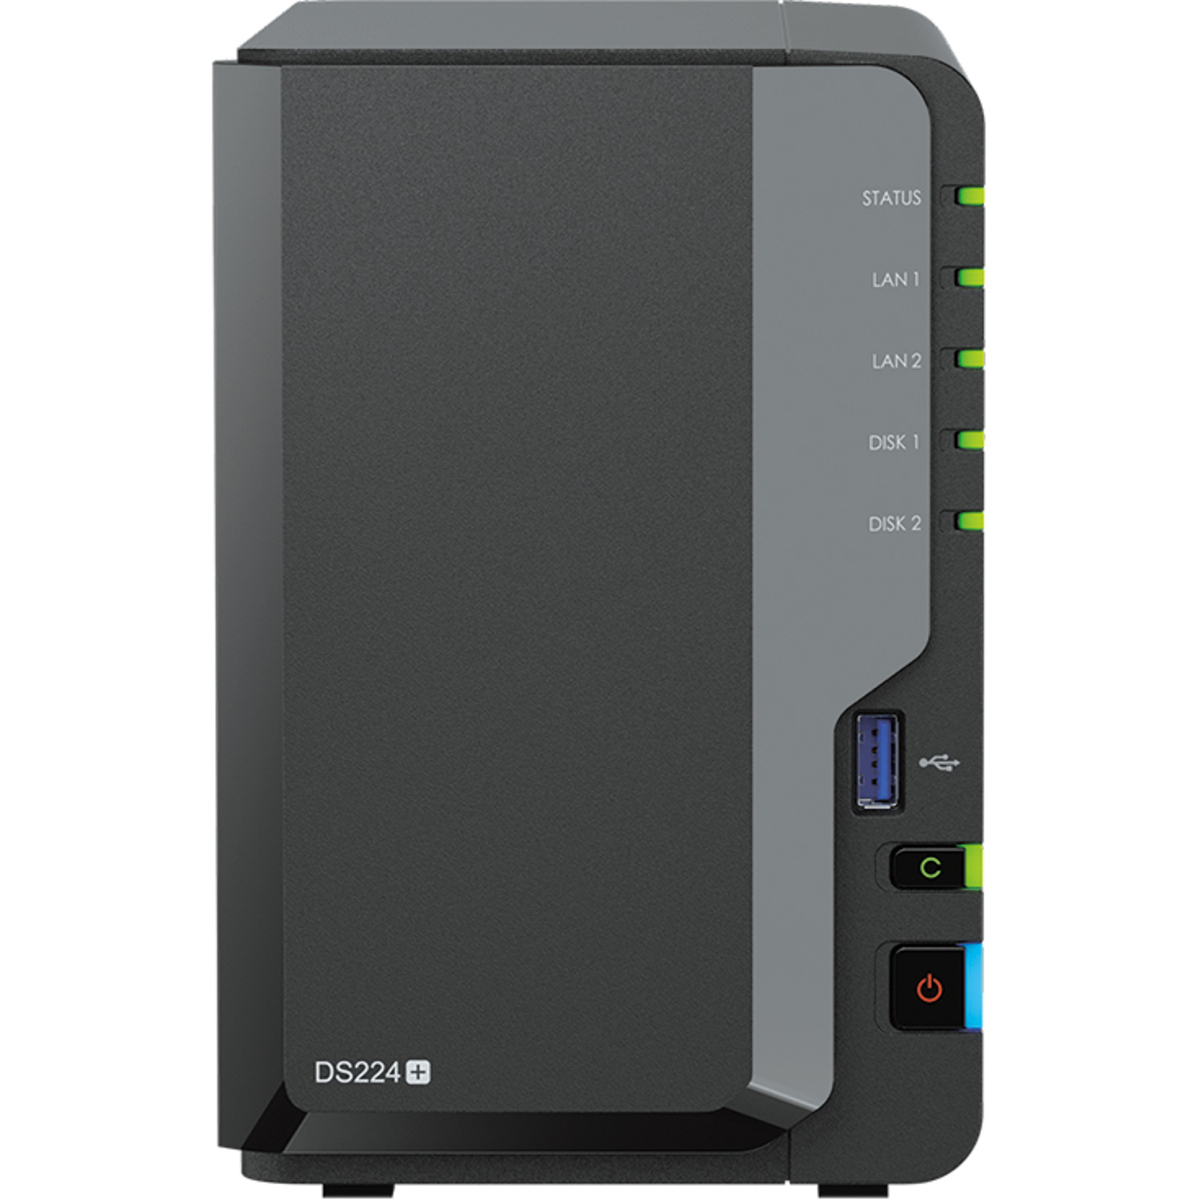 Synology DiskStation DS224+ 32tb 2-Bay Desktop Personal / Basic Home / Small Office NAS - Network Attached Storage Device 2x16tb Seagate EXOS X18 ST16000NM000J 3.5 7200rpm SATA 6Gb/s HDD ENTERPRISE Class Drives Installed - Burn-In Tested - ON SALE - FREE RAM UPGRADE DiskStation DS224+